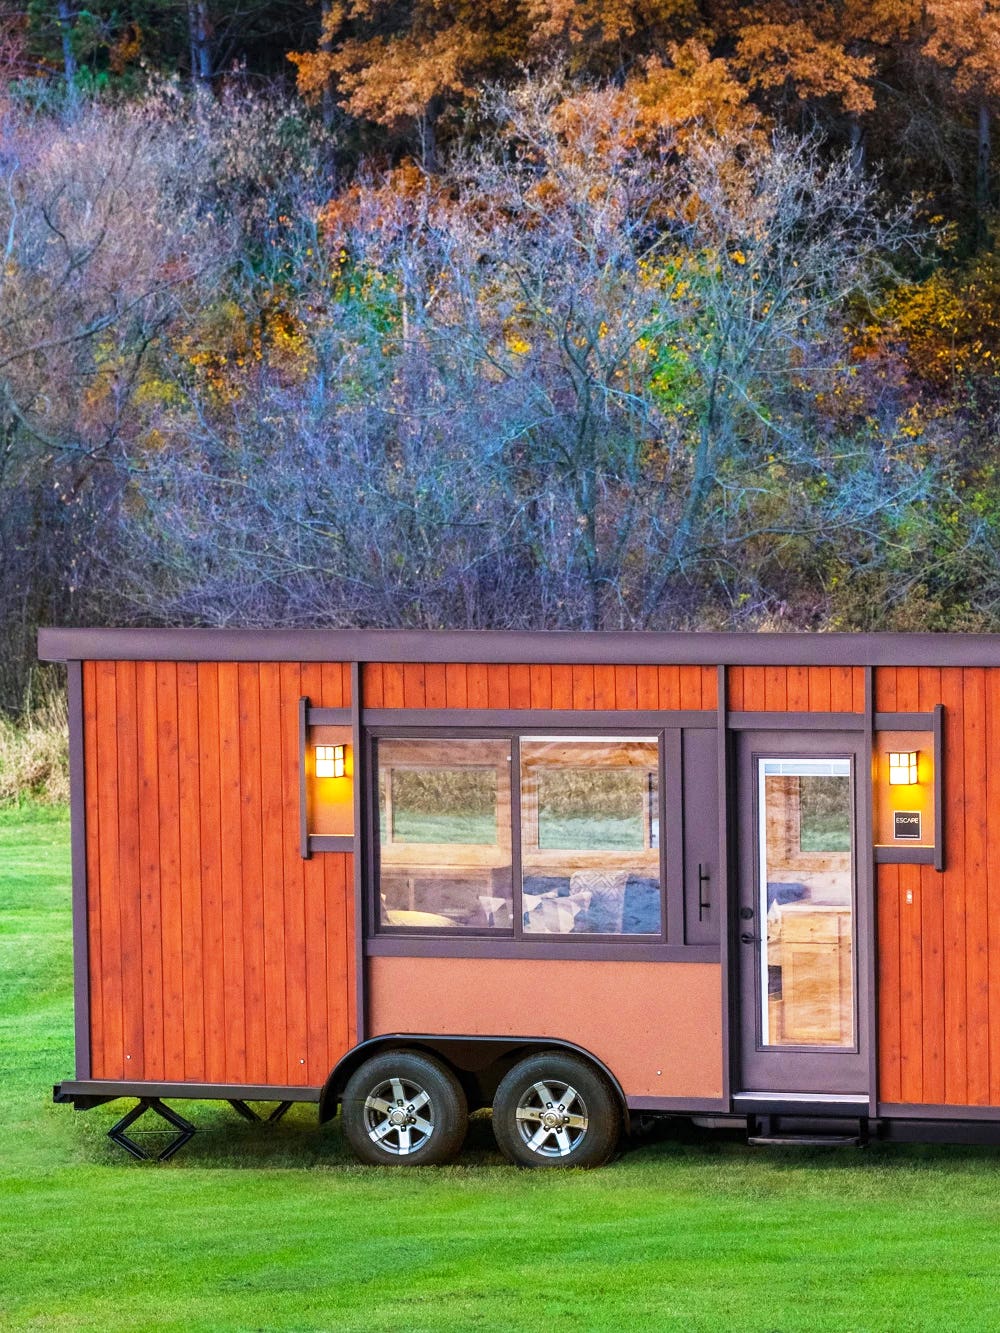 Here’s How You Can Snag a Tiny House for Free